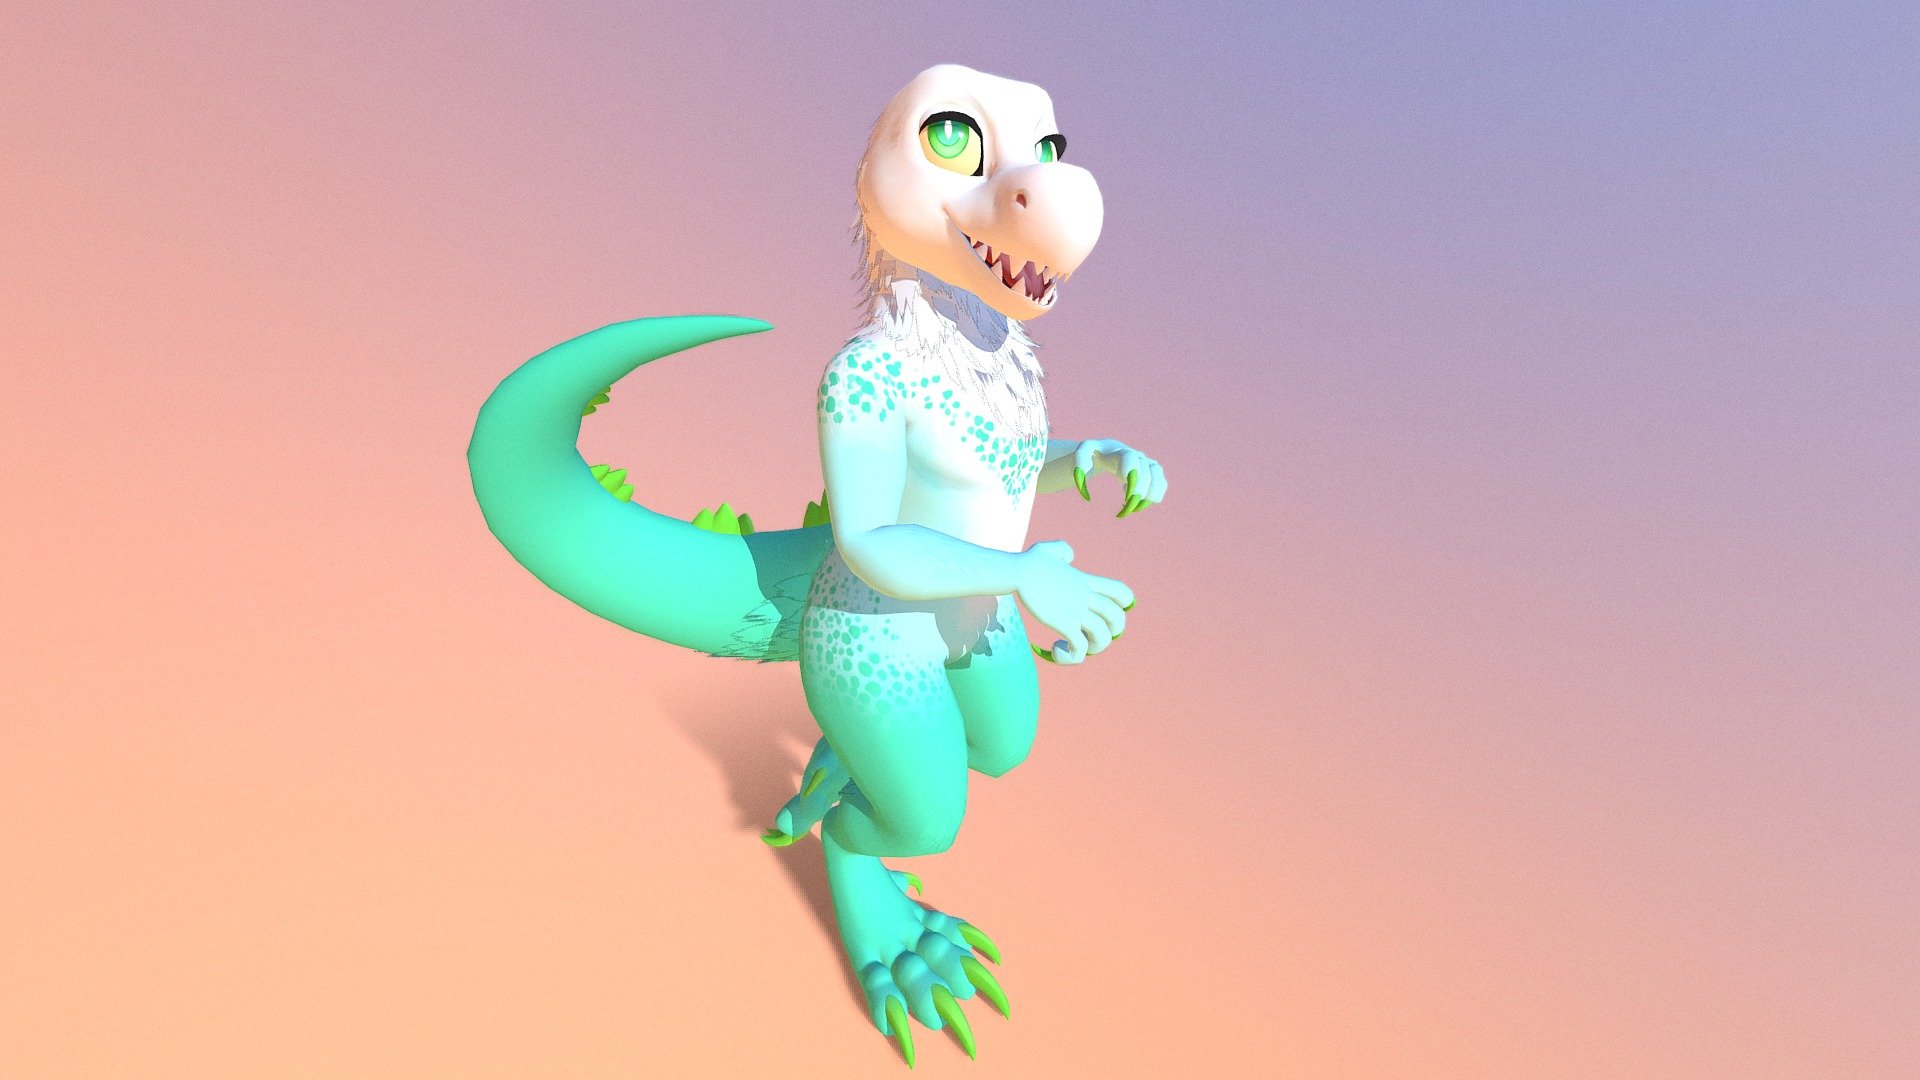 An updated version of the dinosaur avatar I made a while back, with brand new lip sync, eyes, eyelids, and emotes! c:
This one is a pay-to-use version! Included are all of the 4 different texture variants, editable model and texture files (.blend and .psd) and editable icon file, all with named layers.

To buy, please visit: https://www.furaffinity.net/view/37850289/ ! 

For any inquiries about this avatar, you can contact me via telegram @MeeloGoat - Dinosaur Avatar [Updated Version 2020 [$!] - 3D model by Meelo 3d model